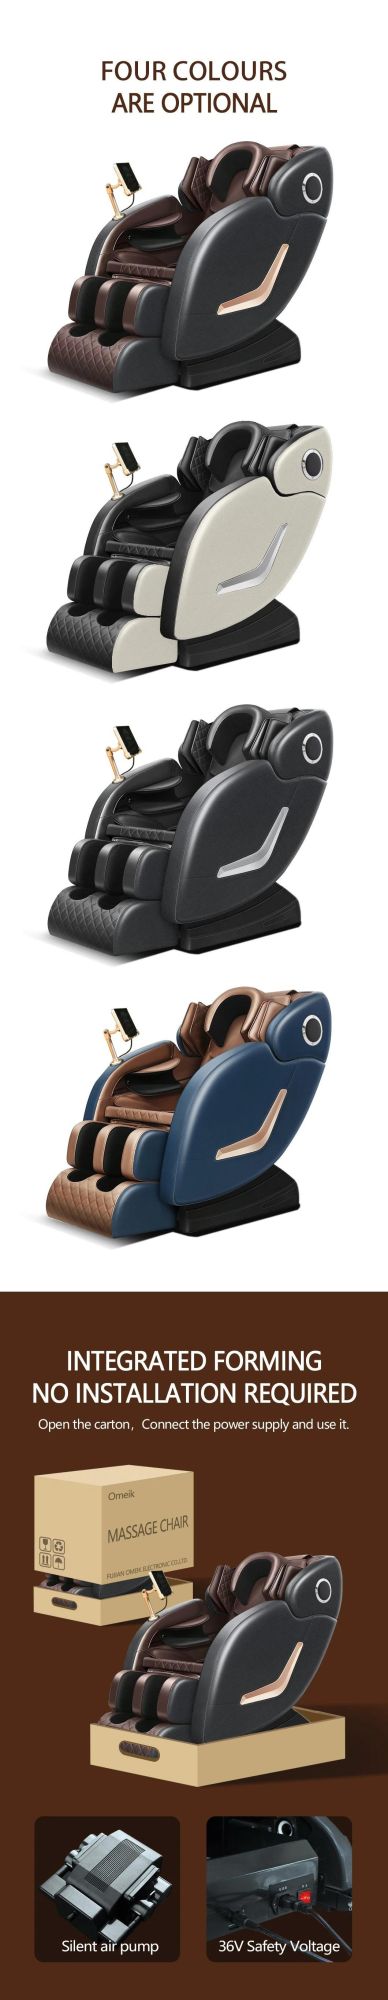 Low Price Intelligent Best Electric Luxury Full Body Automatic Recliner Relaxing Foot Massage Sofa